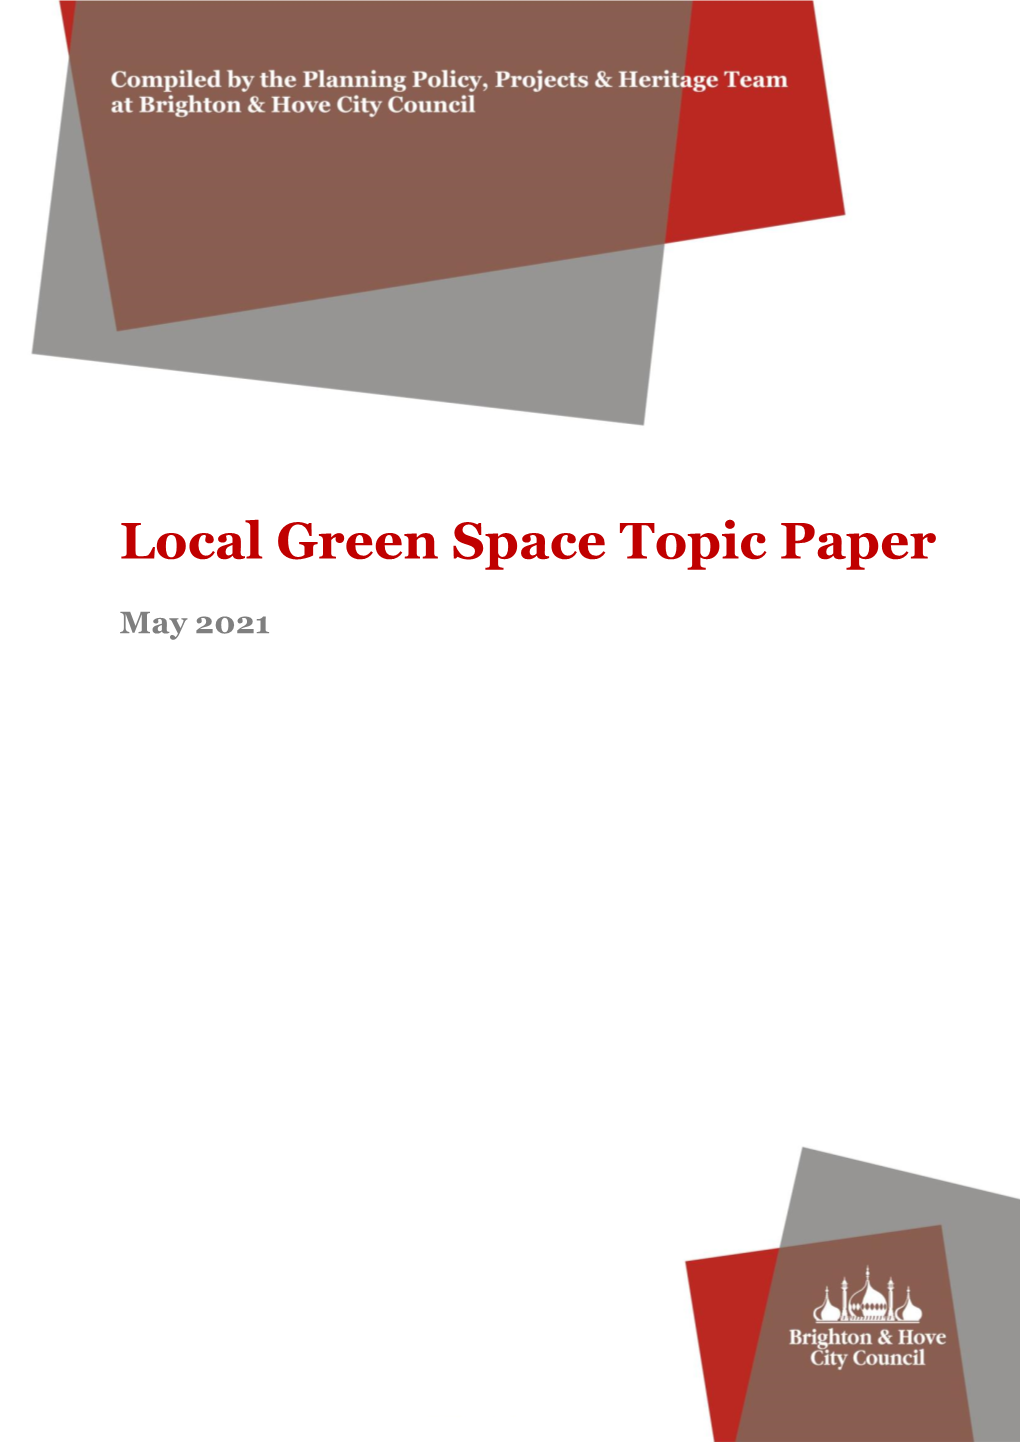 Local Green Space Topic Paper